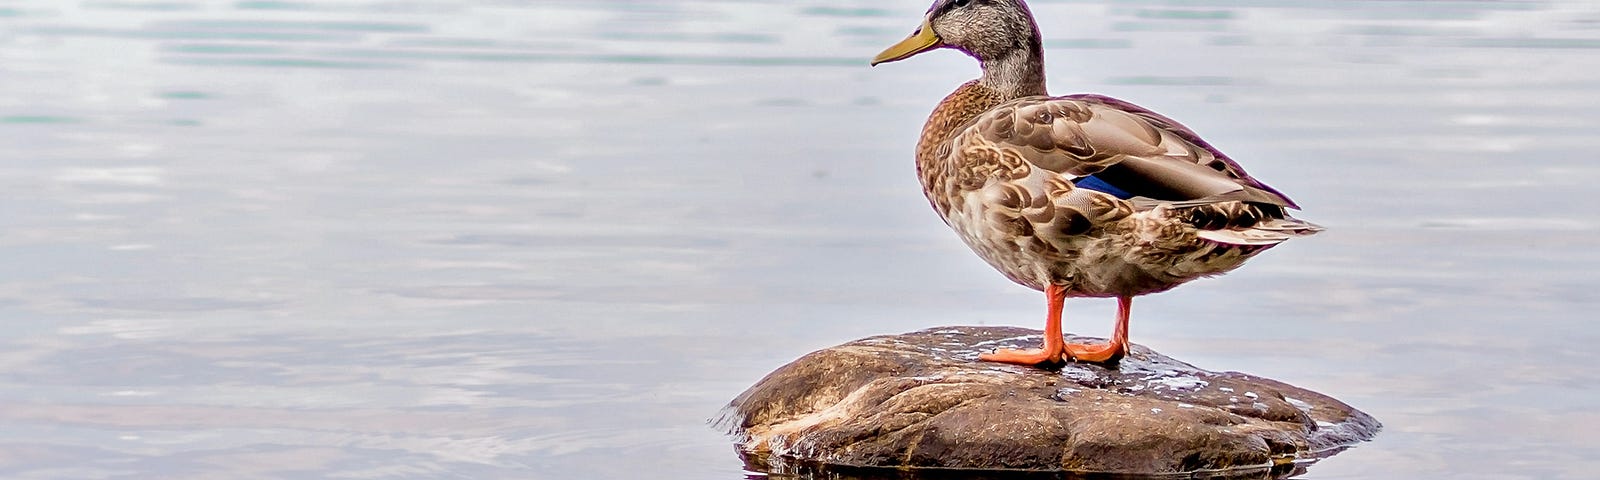 A duck standing on the rock in the middle of a pond.